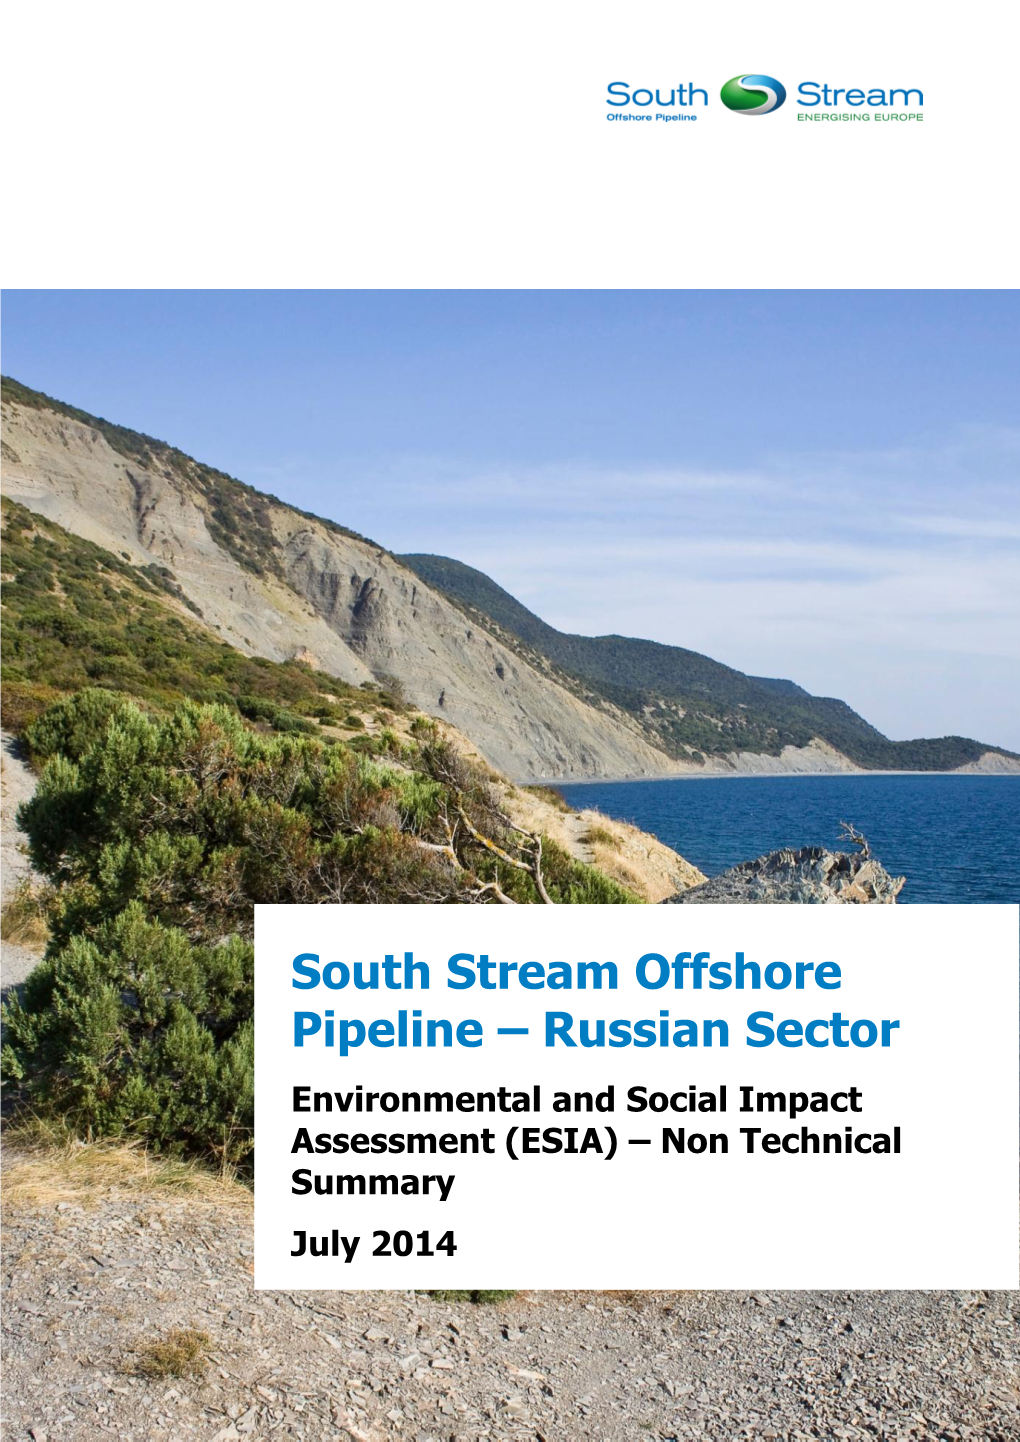 South Stream Offshore Pipeline – Russian Sector Environmental and Social Impact Assessment (ESIA) – Non Technical Summary July 2014